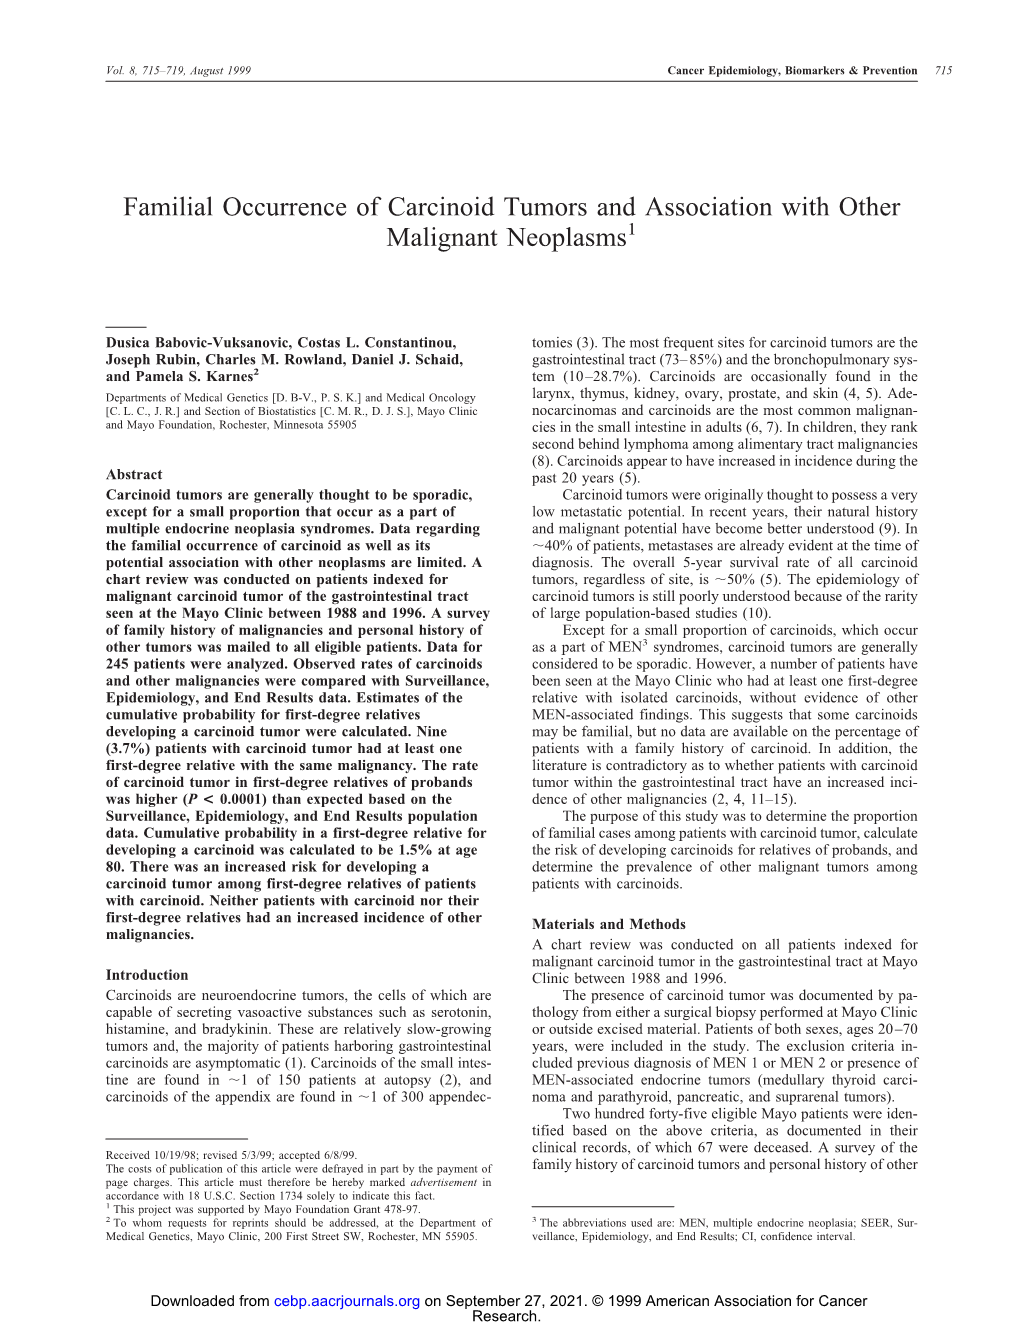 Familial Occurrence of Carcinoid Tumors and Association with Other Malignant Neoplasms1